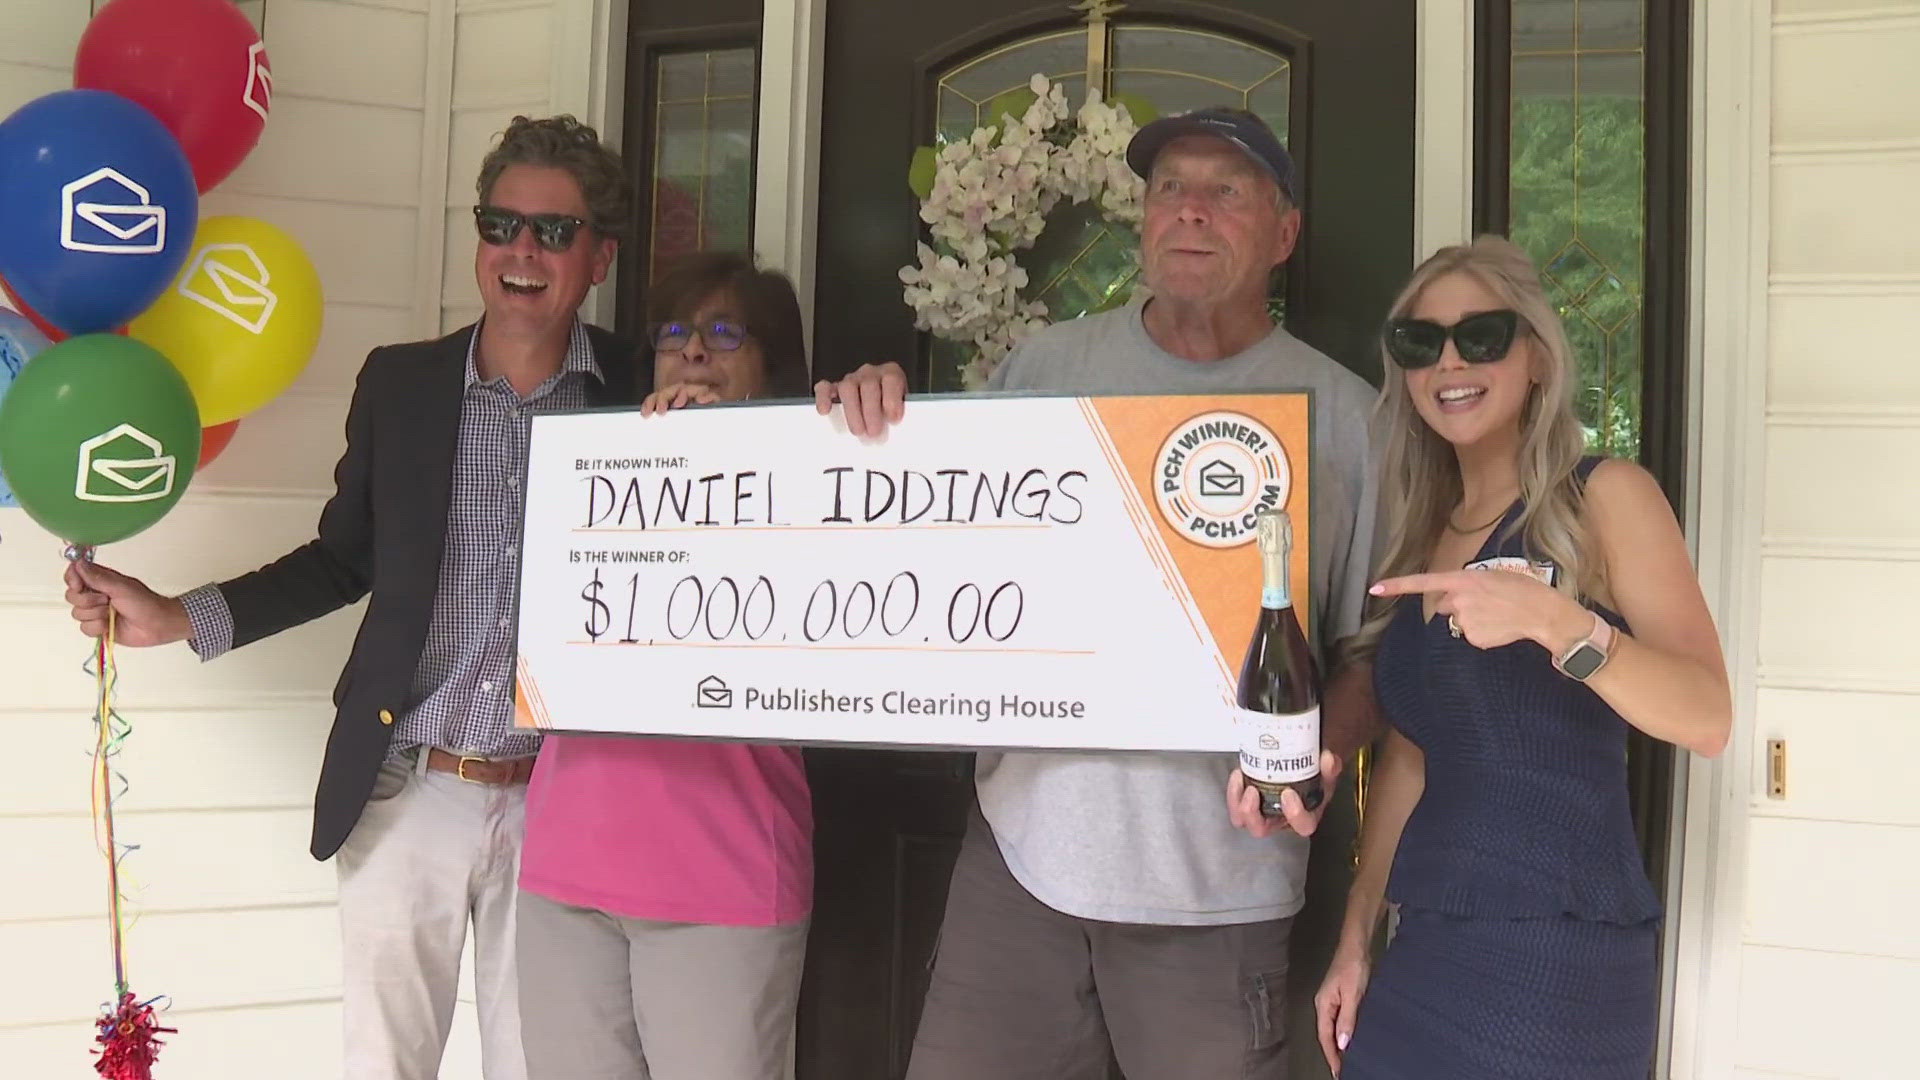 Publishers Clearing House surprises a couple with the winnings.